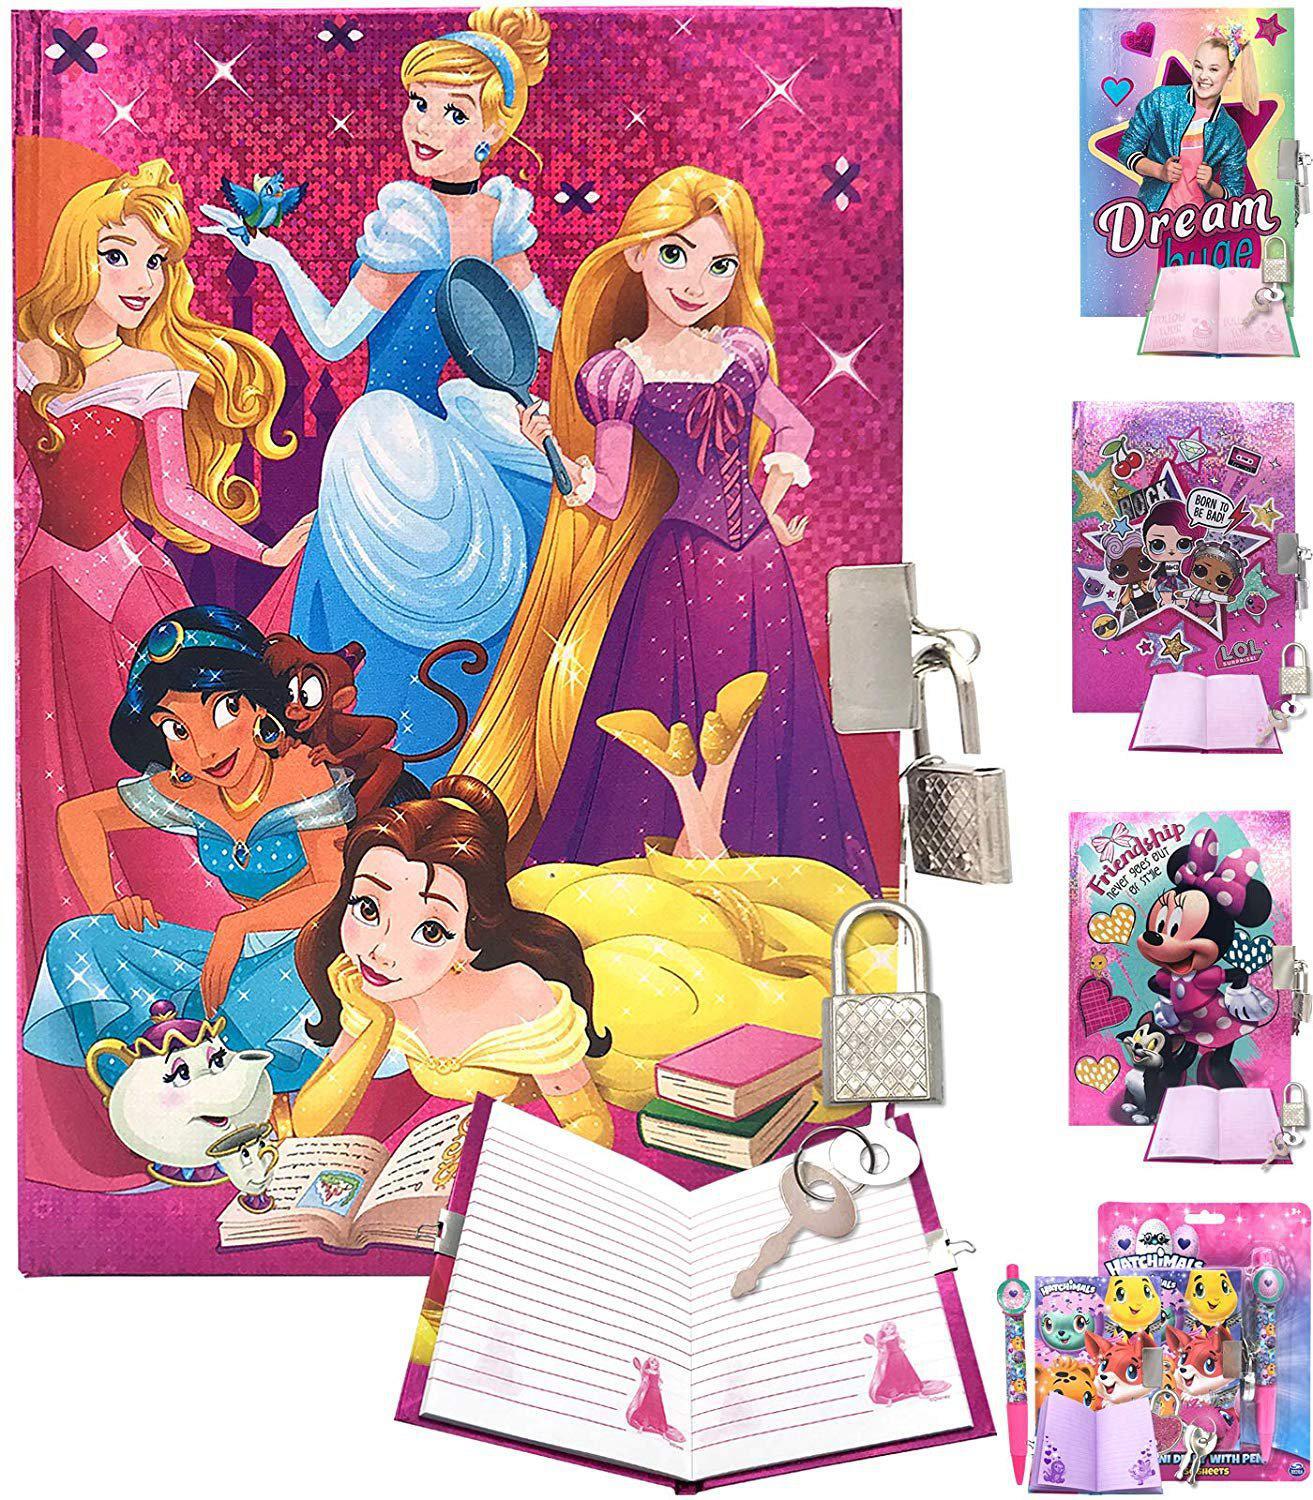 Disney Princess Keep Your Secret Private Journal Notebook Diary with Lock and Key - Metallic Cover Style, For Girls Toddlers Teens